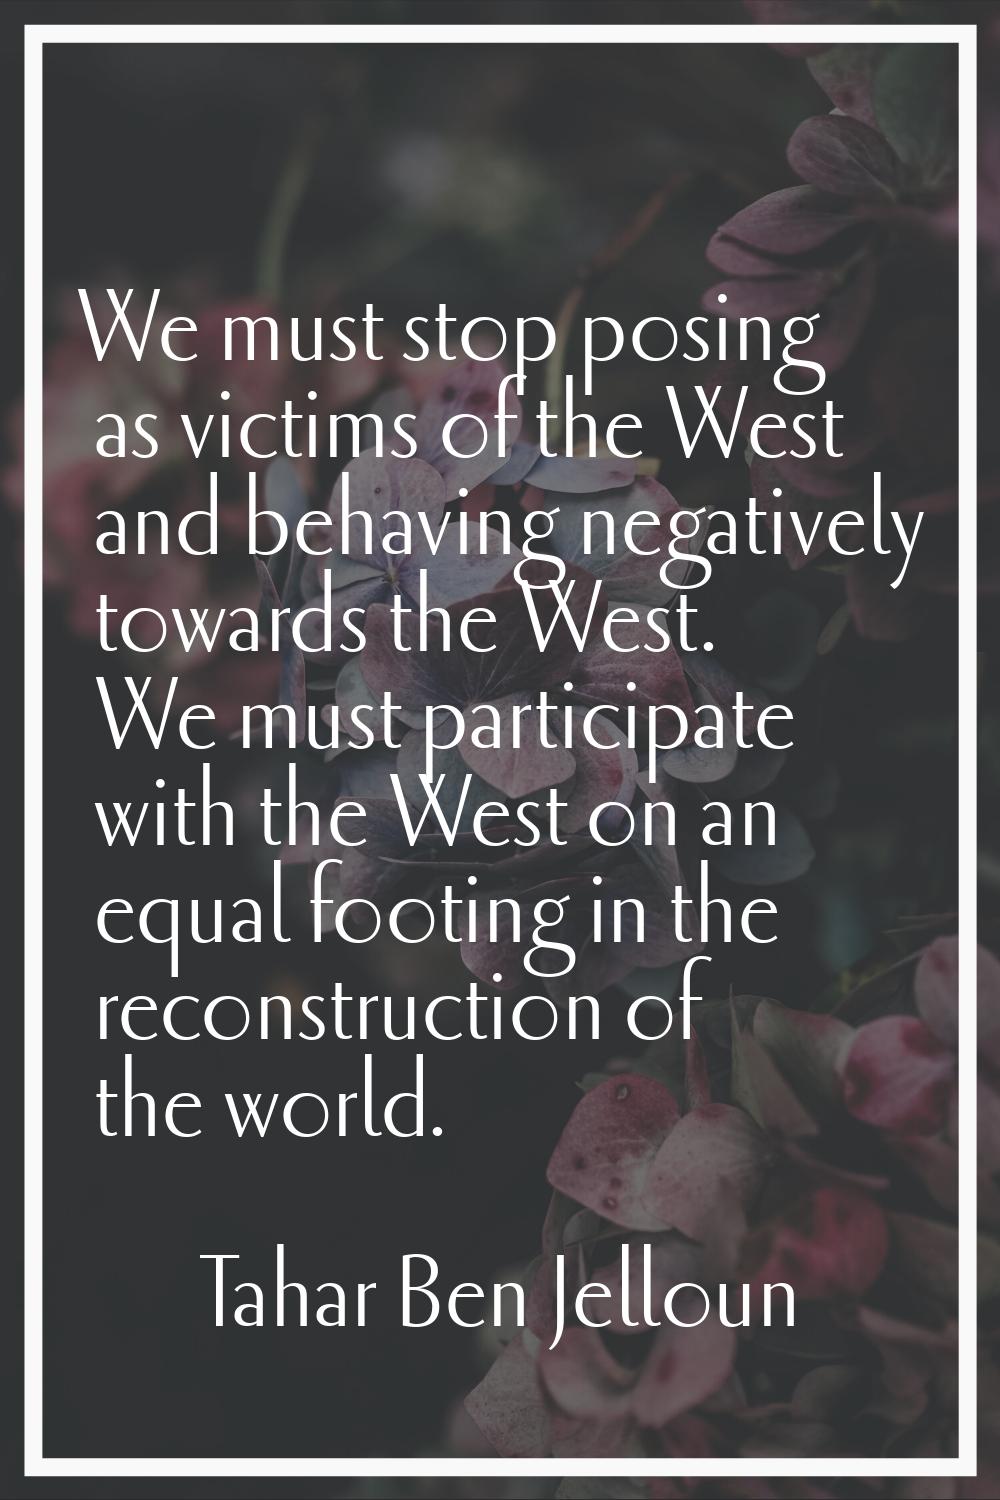 We must stop posing as victims of the West and behaving negatively towards the West. We must partic